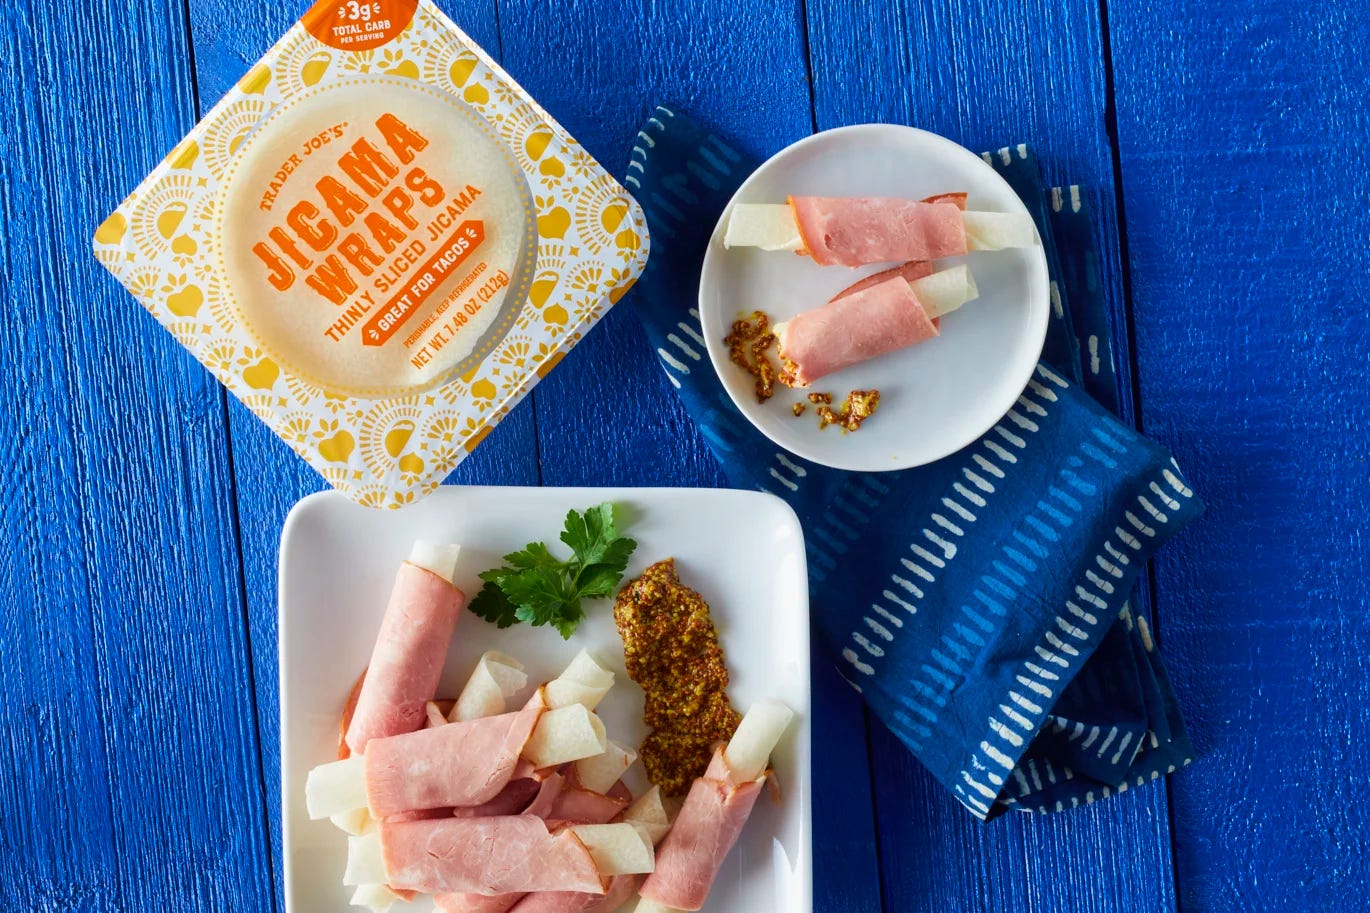 Jicama Wraps package and its contents mixed with ham